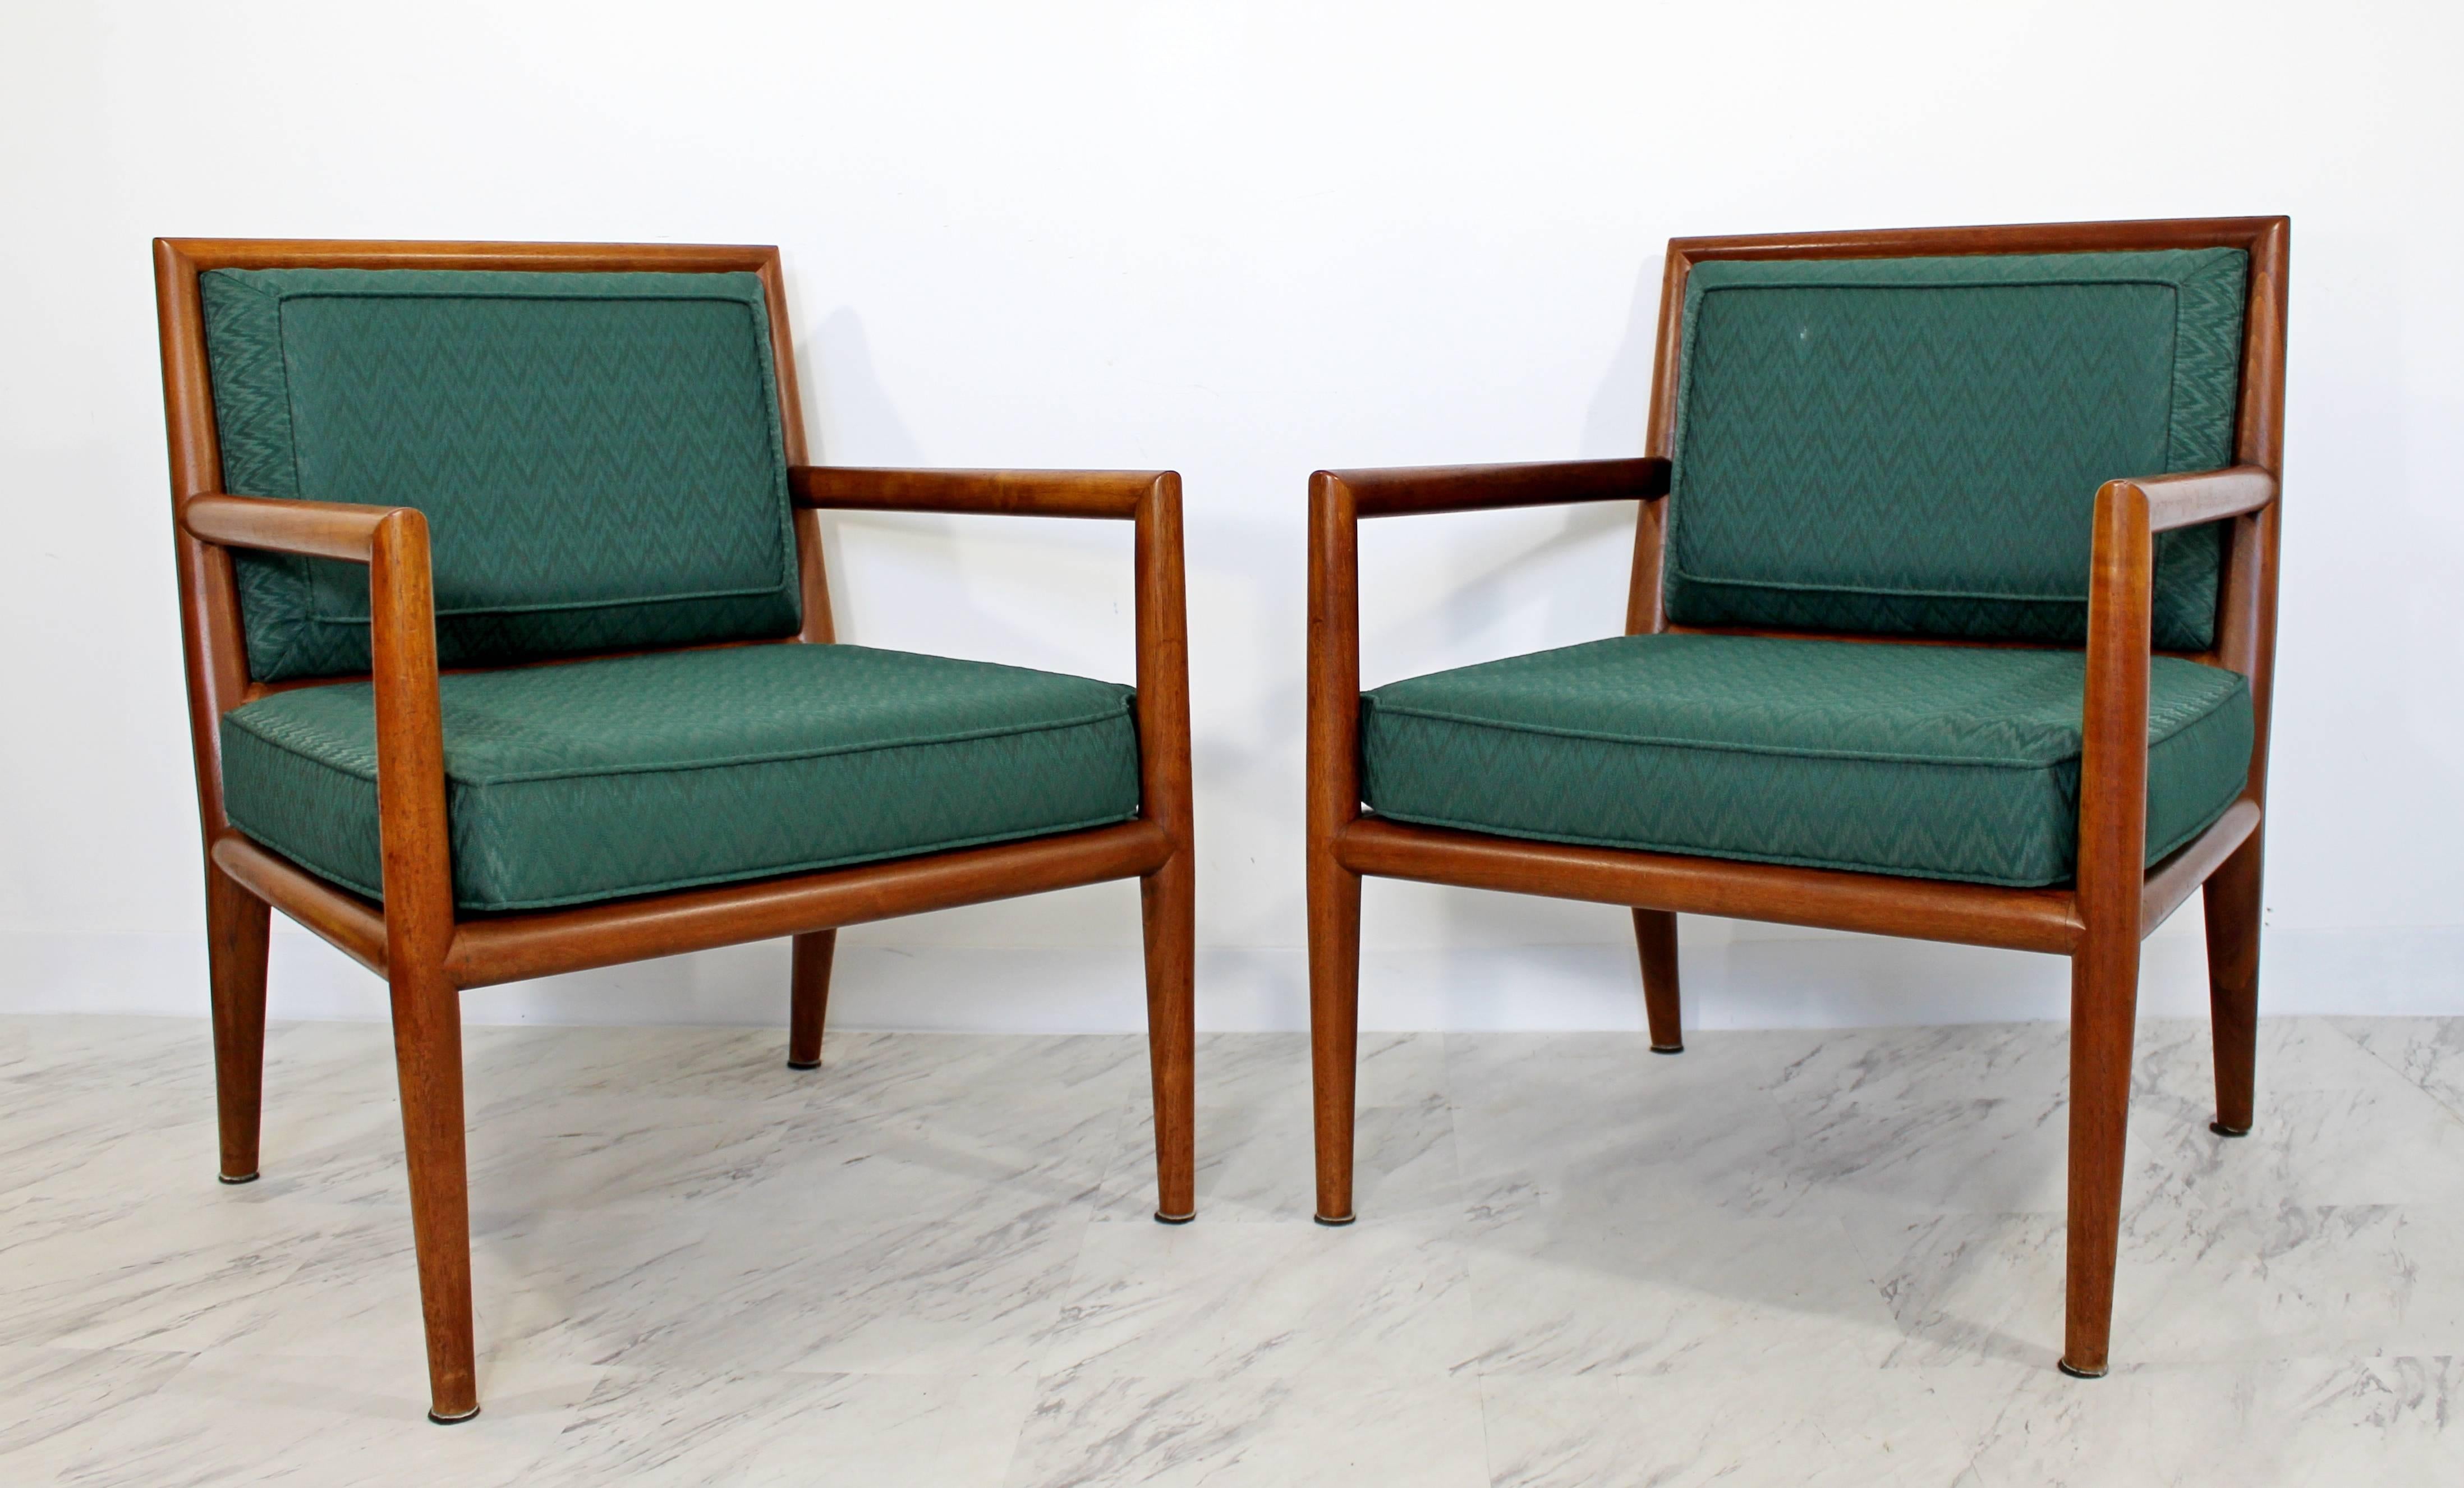 For your consideration is a Classic pair of arm chairs, designed by Robsjohn-Gibbings for Baker in the 1950s. In excellent condition. The dimensions are 23